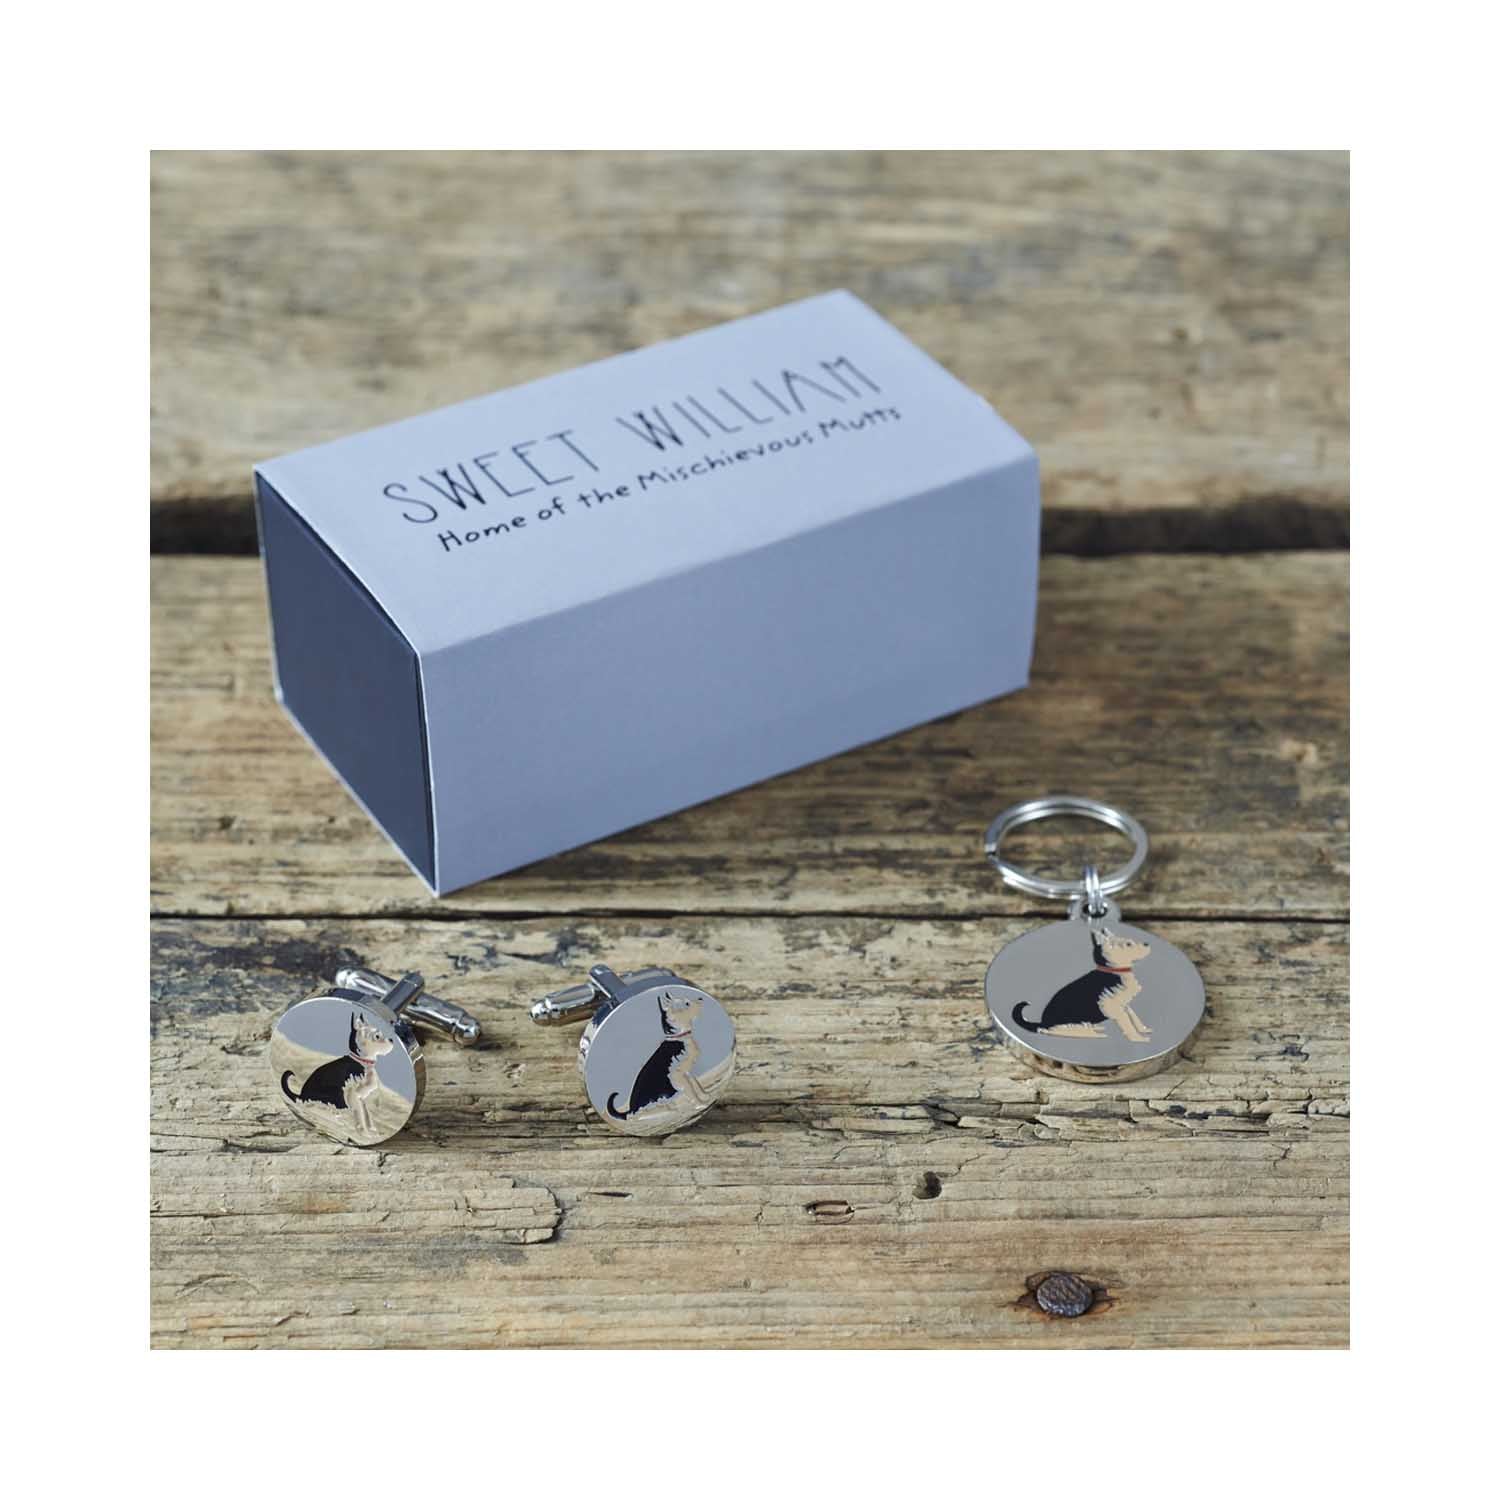 Dog Lover Gifts available at Dog Krazy Gifts - Ella The Yorkshire Terrier Cufflink and Dog Tag Set - part of the Sweet William range available from DogKrazyGifts.co.uk